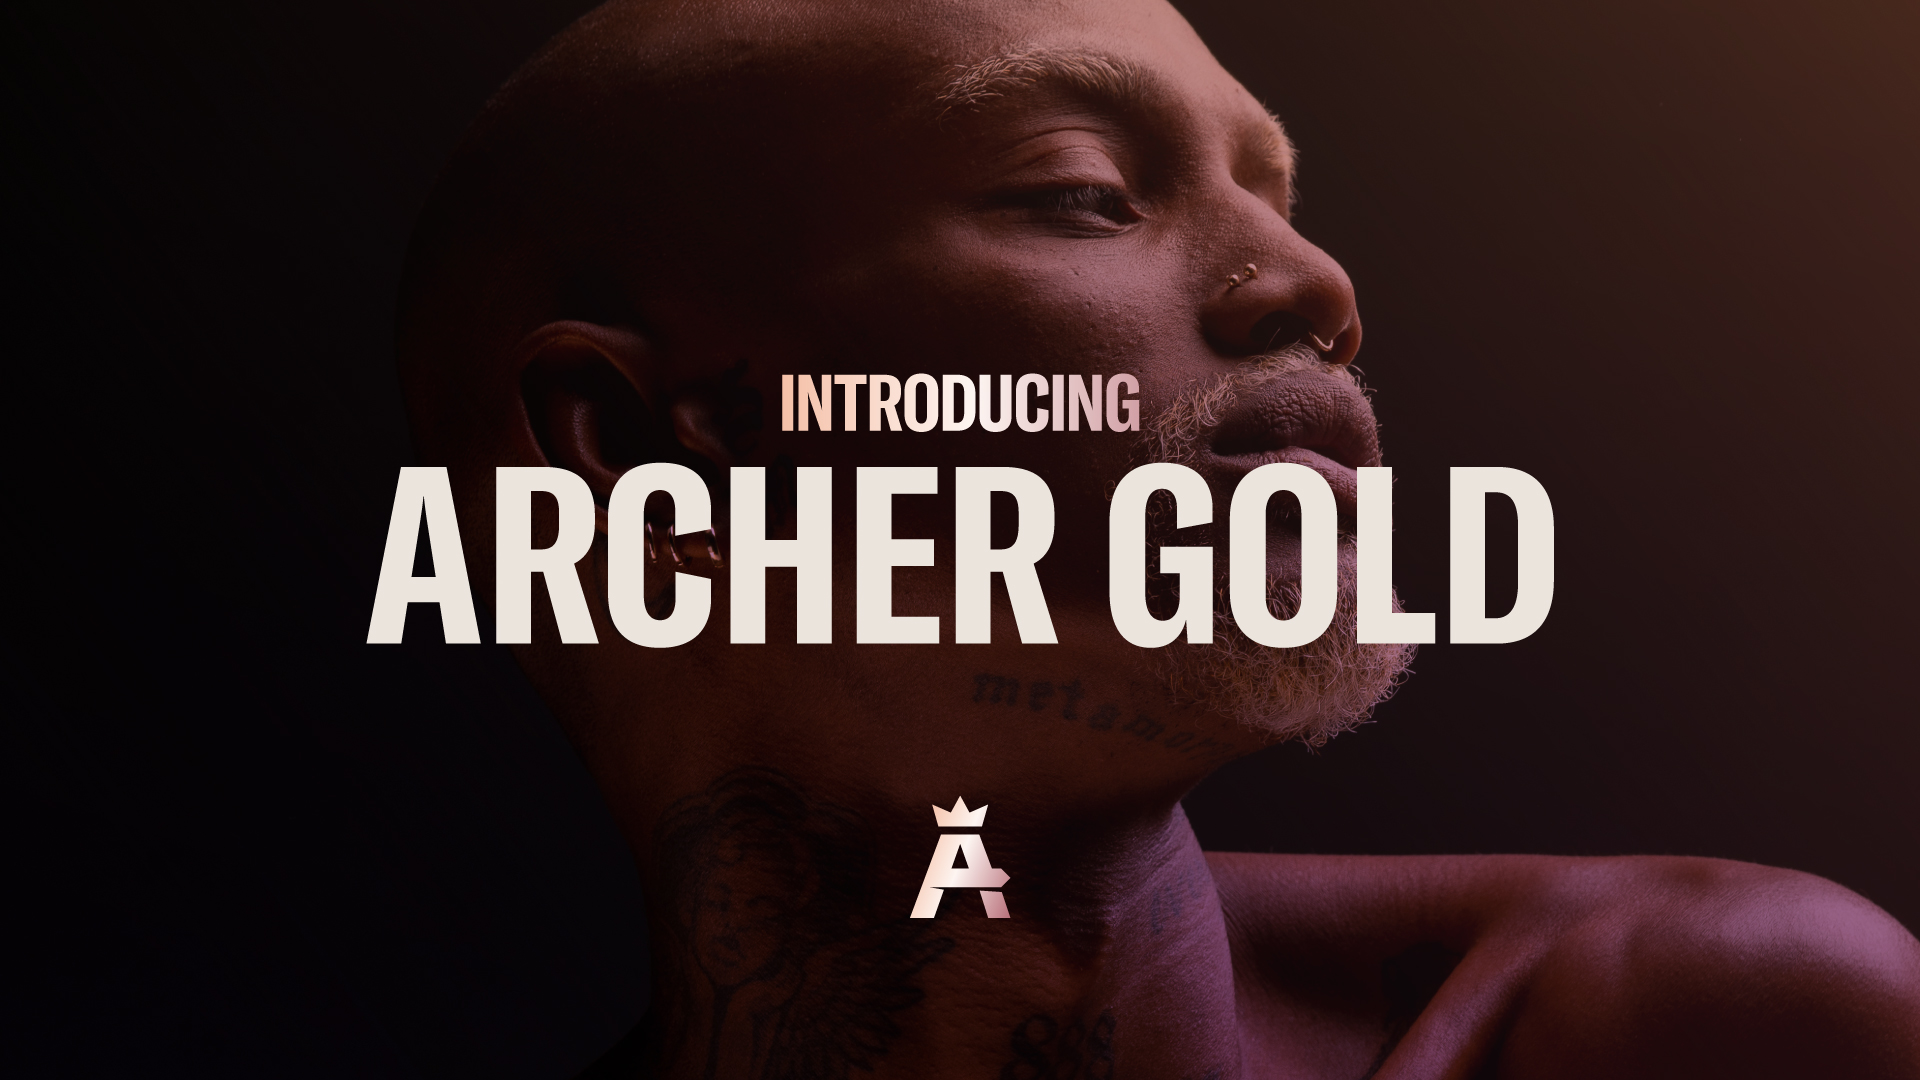 SAY HELLO TO ARCHER GOLD!